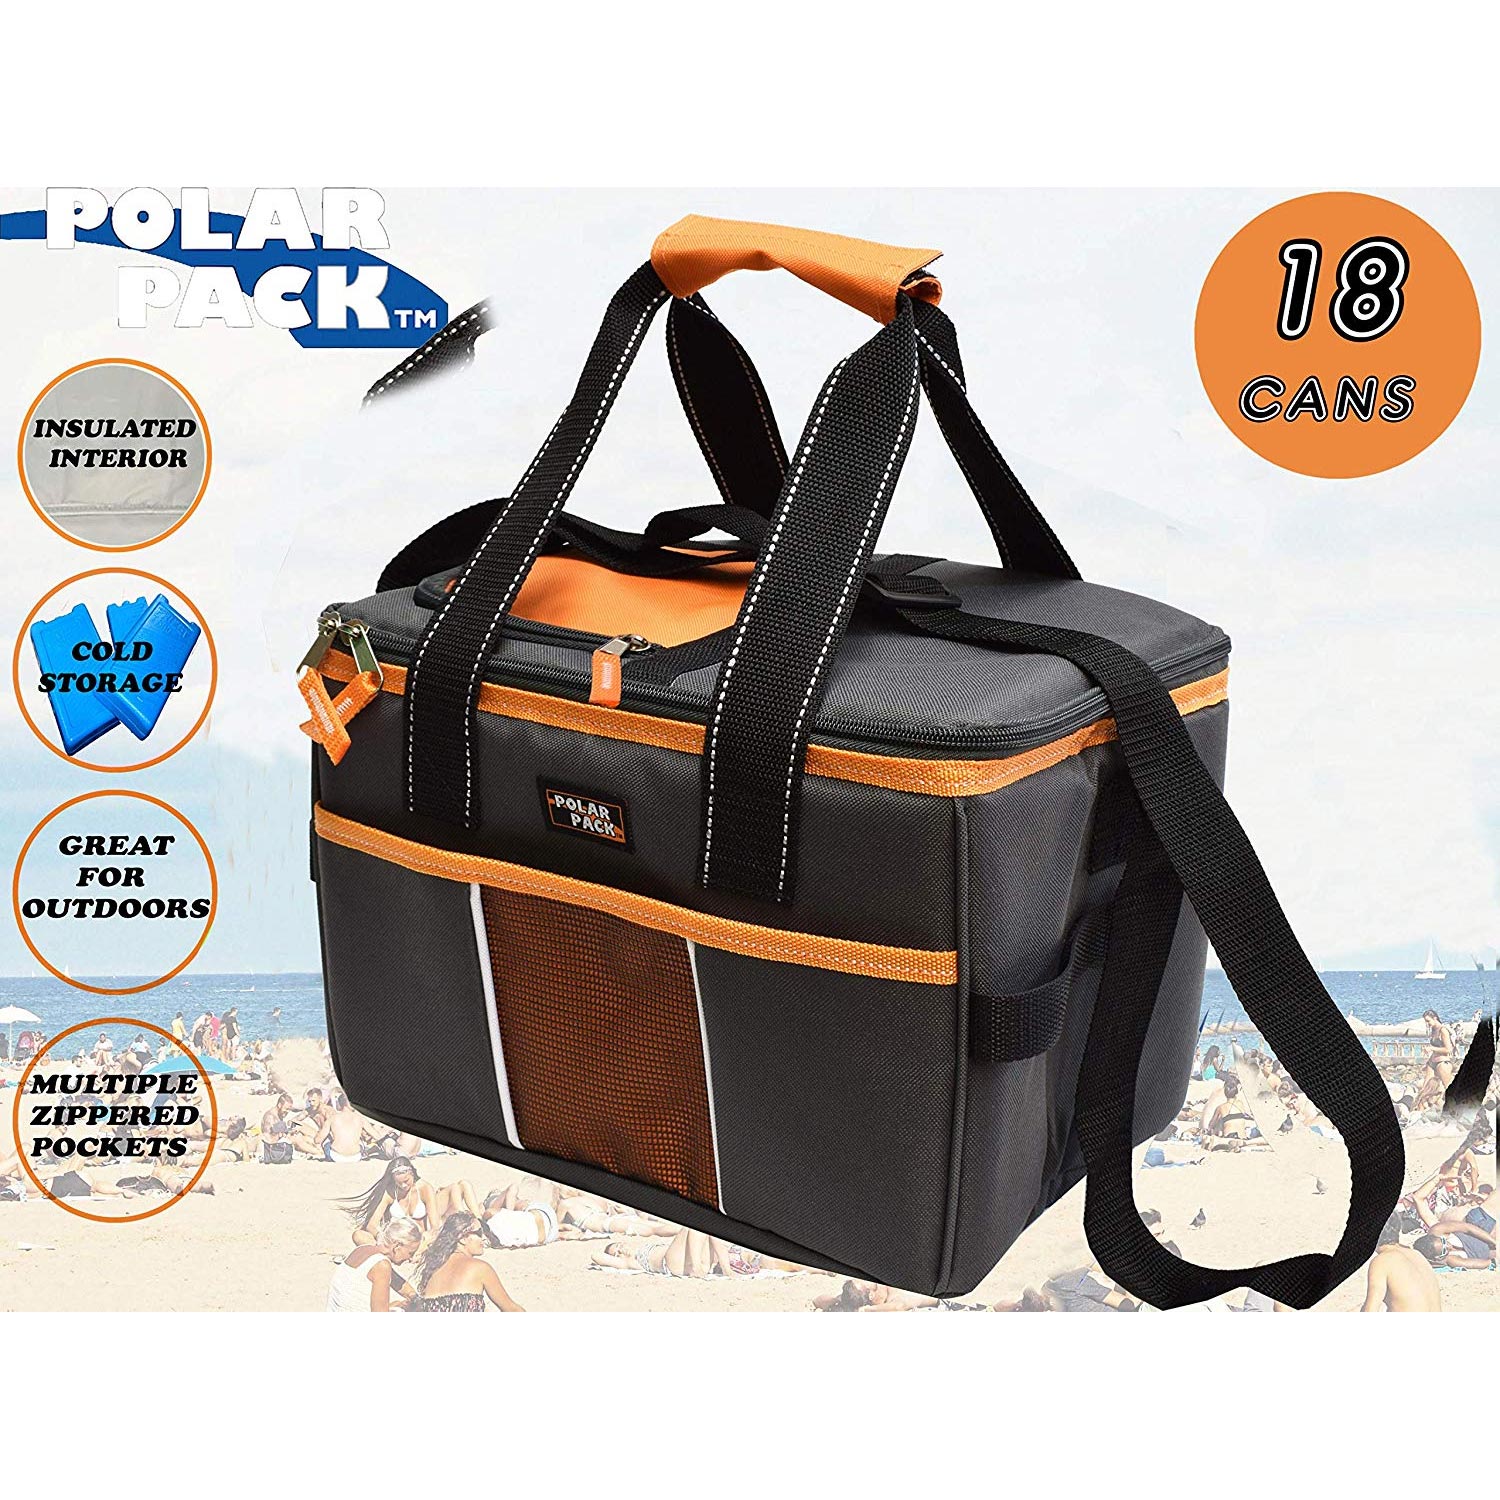 School POLAR PACK 18 Can Double Handle Square Box Collapsible Cooler Bag Soft Portable Insulated Picnic Bag Outdoor Indoor Travel Lunch Bag for Camping Travel & Sports ROYAL/LIME 